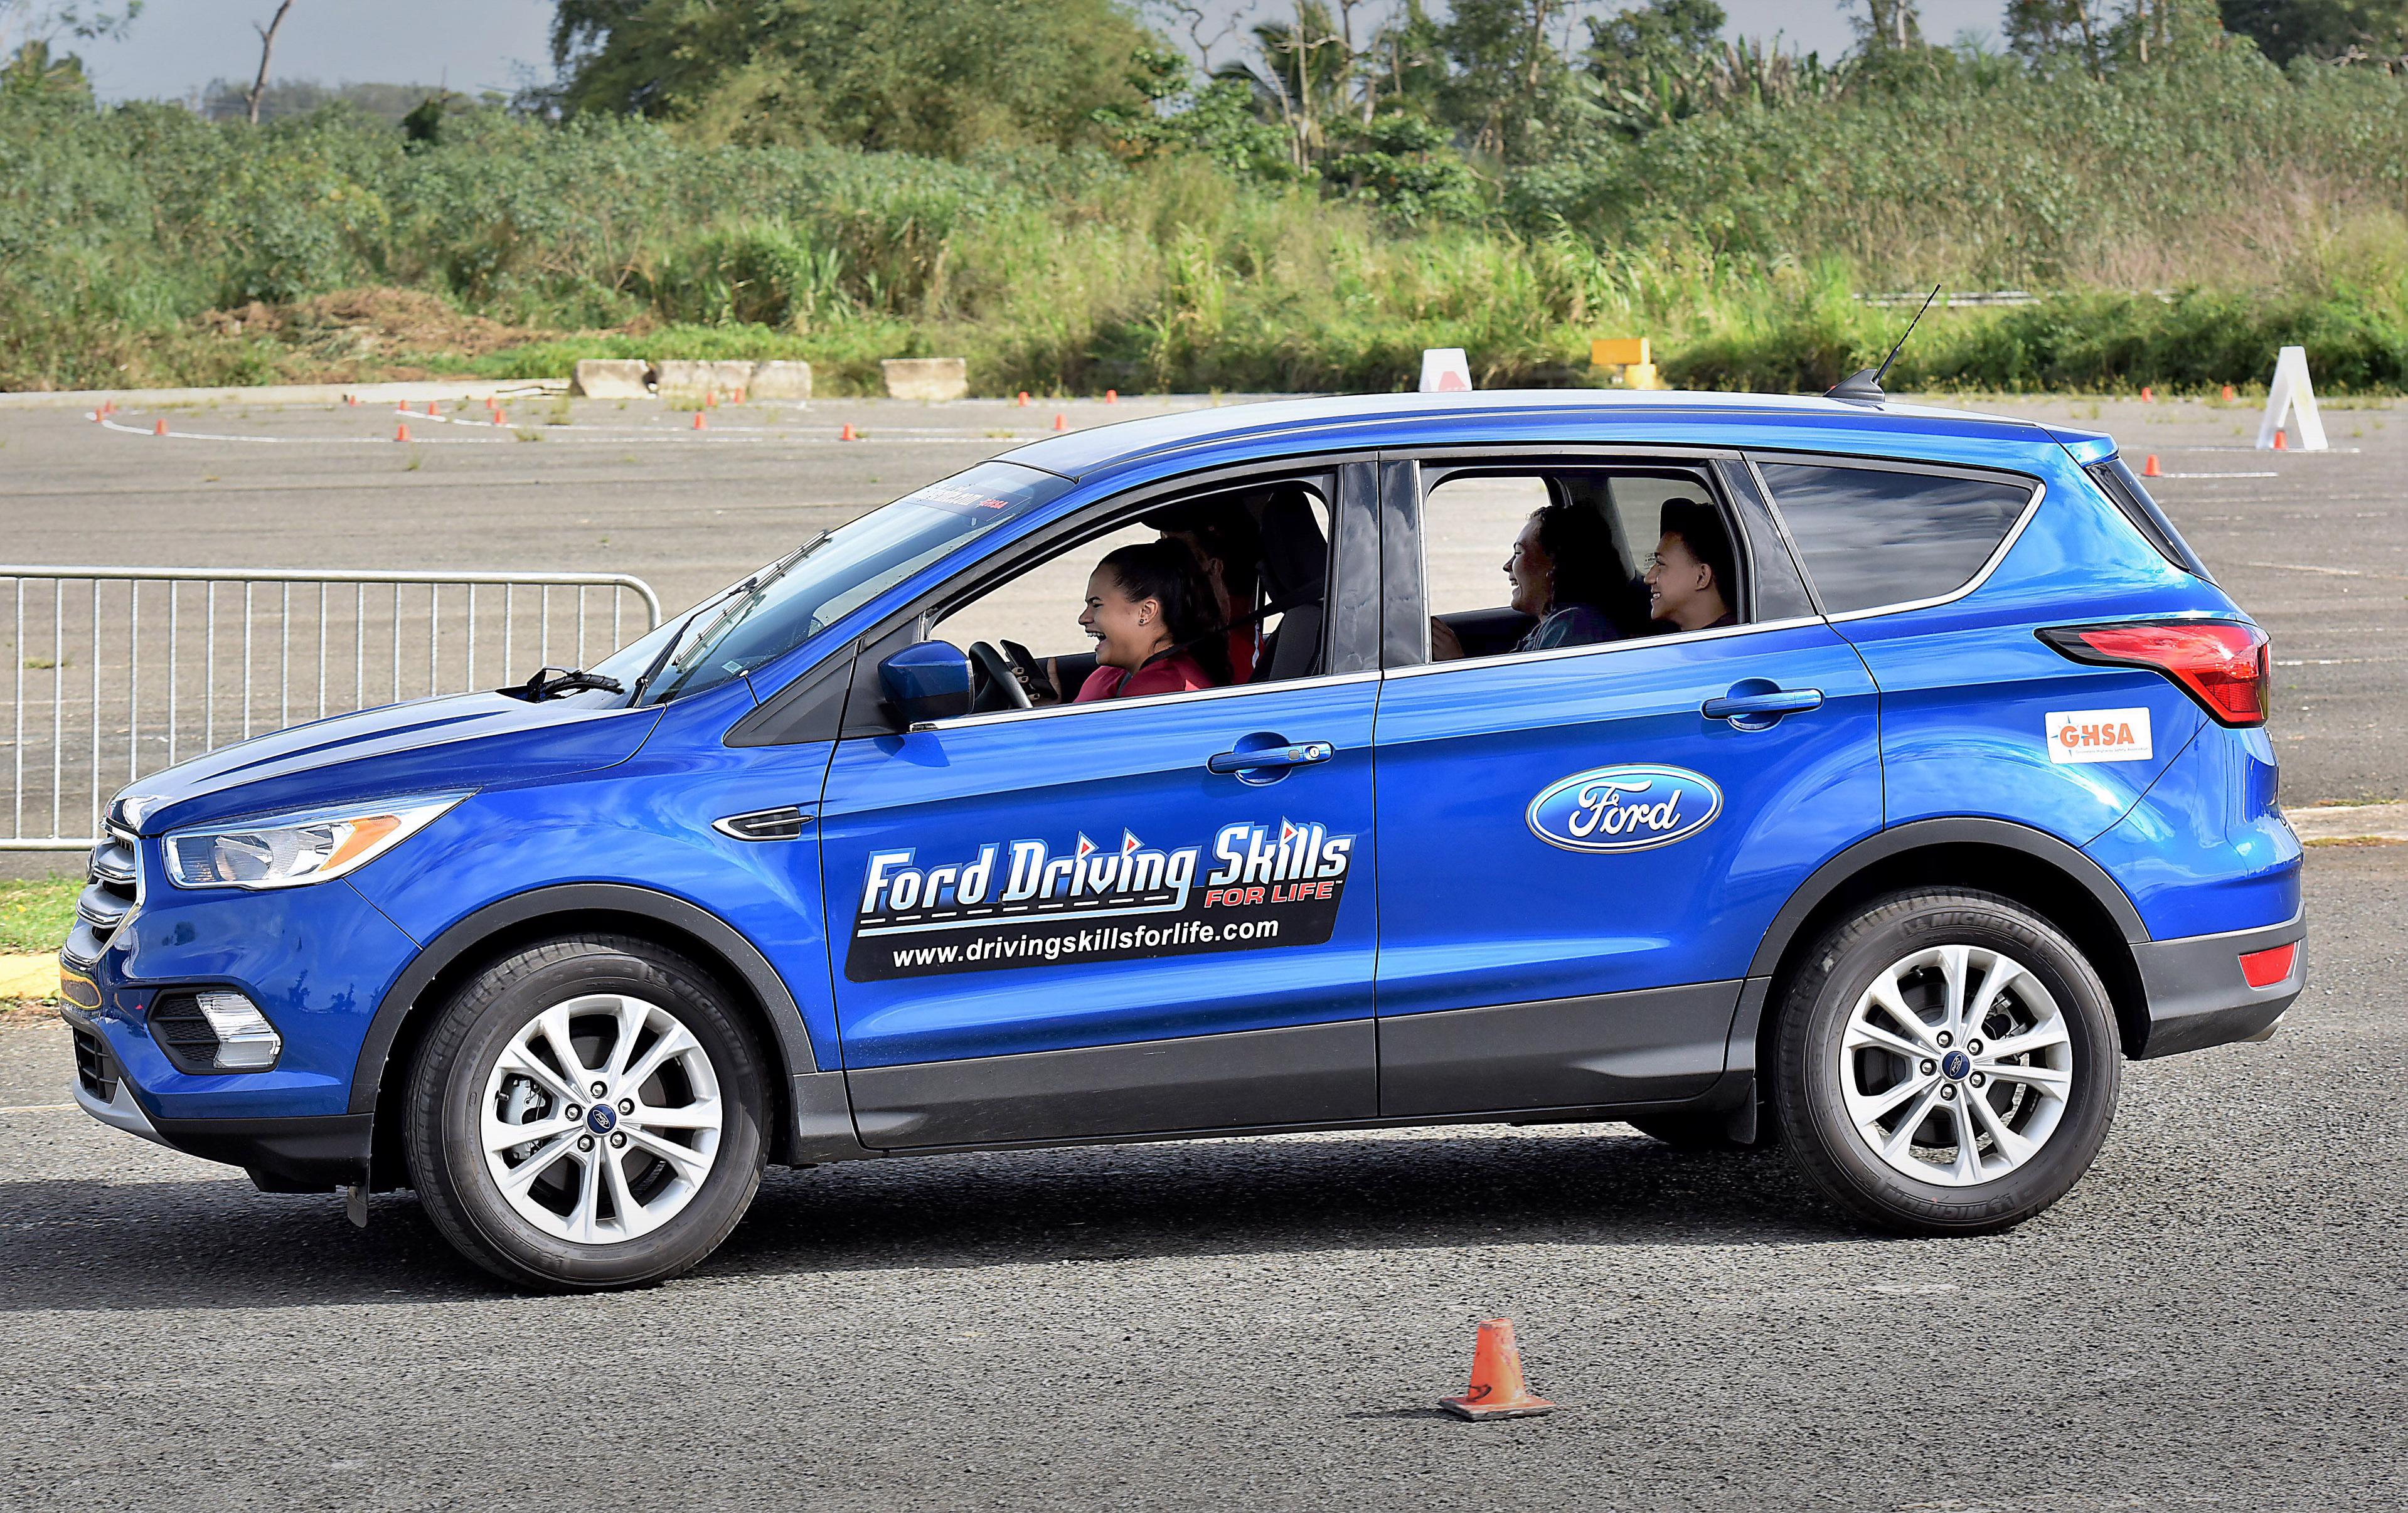 Ford Driving Skills for Life Returns to Puerto Rico The News Wheel